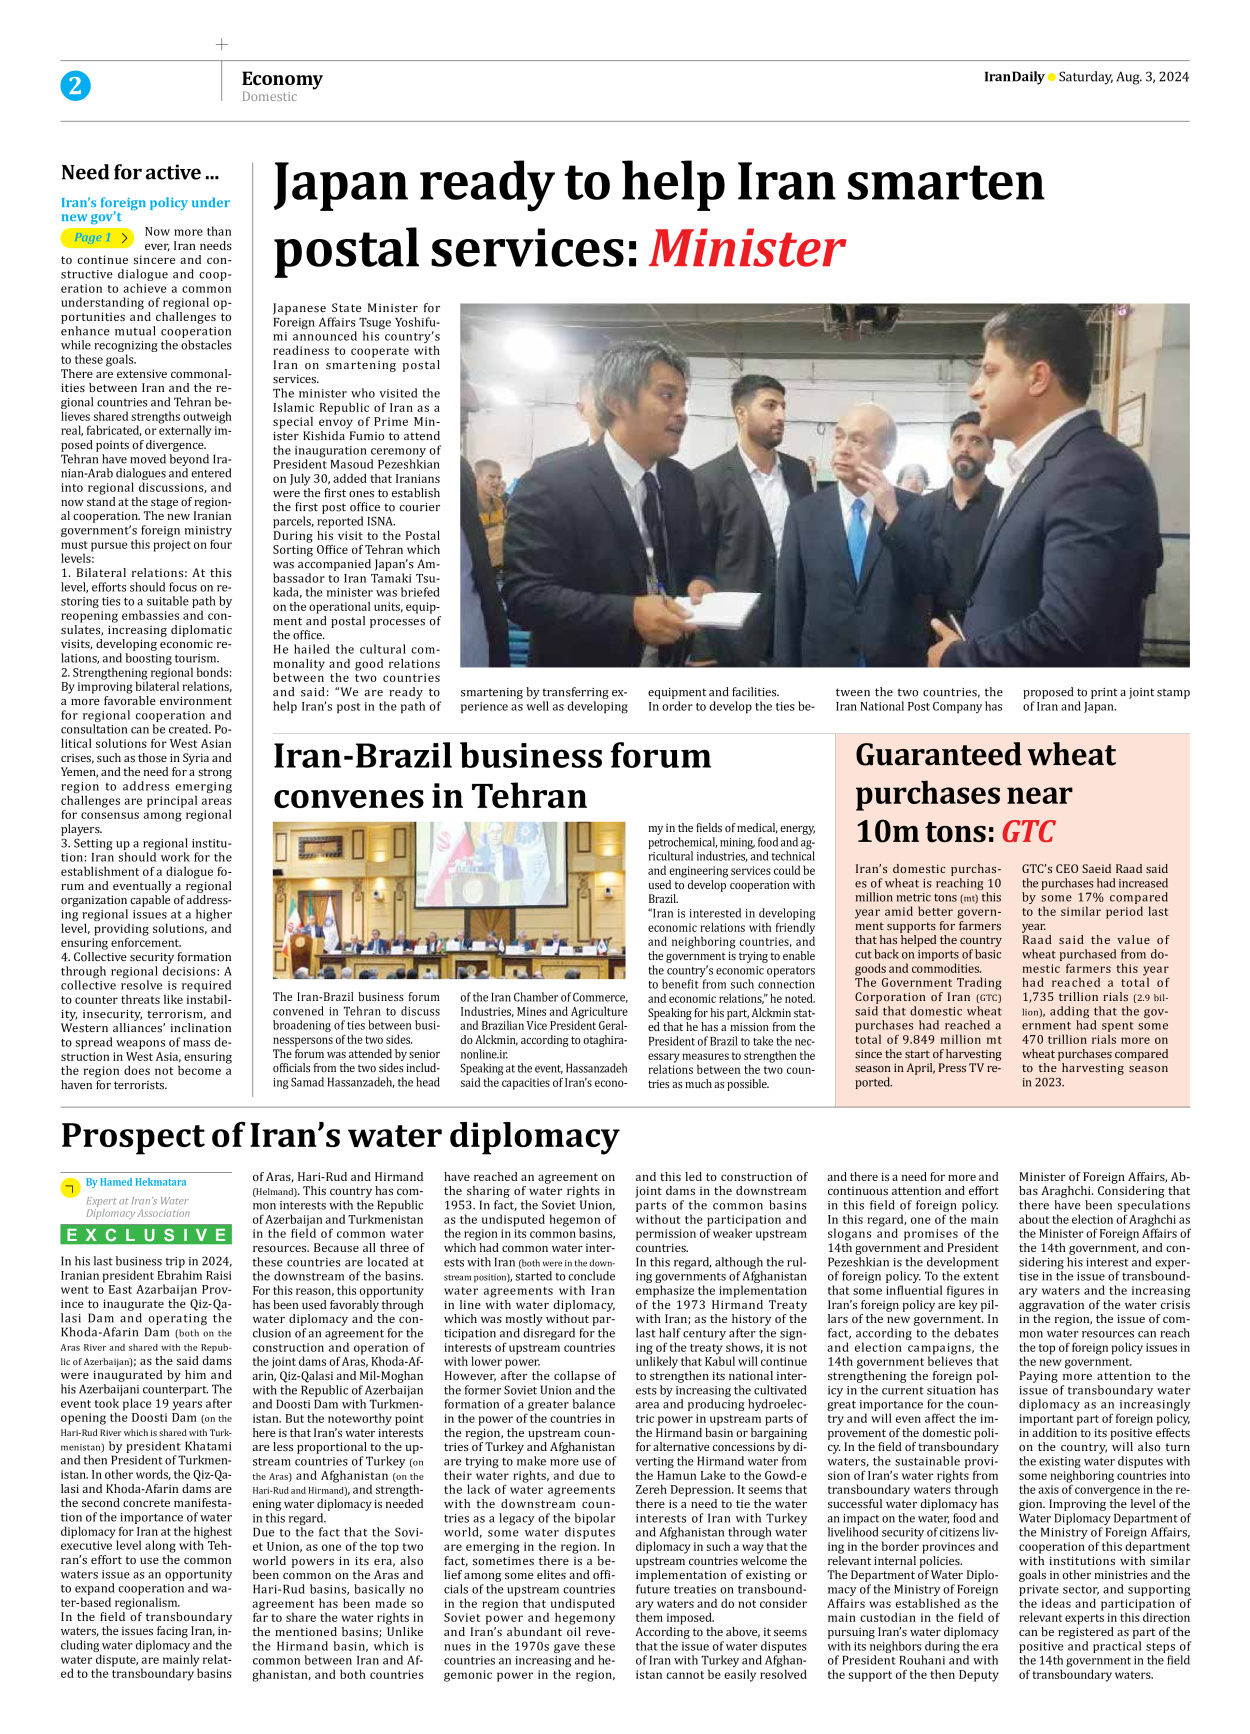 Iran Daily - Number Seven Thousand Six Hundred and Eighteen - 03 August 2024 - Page 2